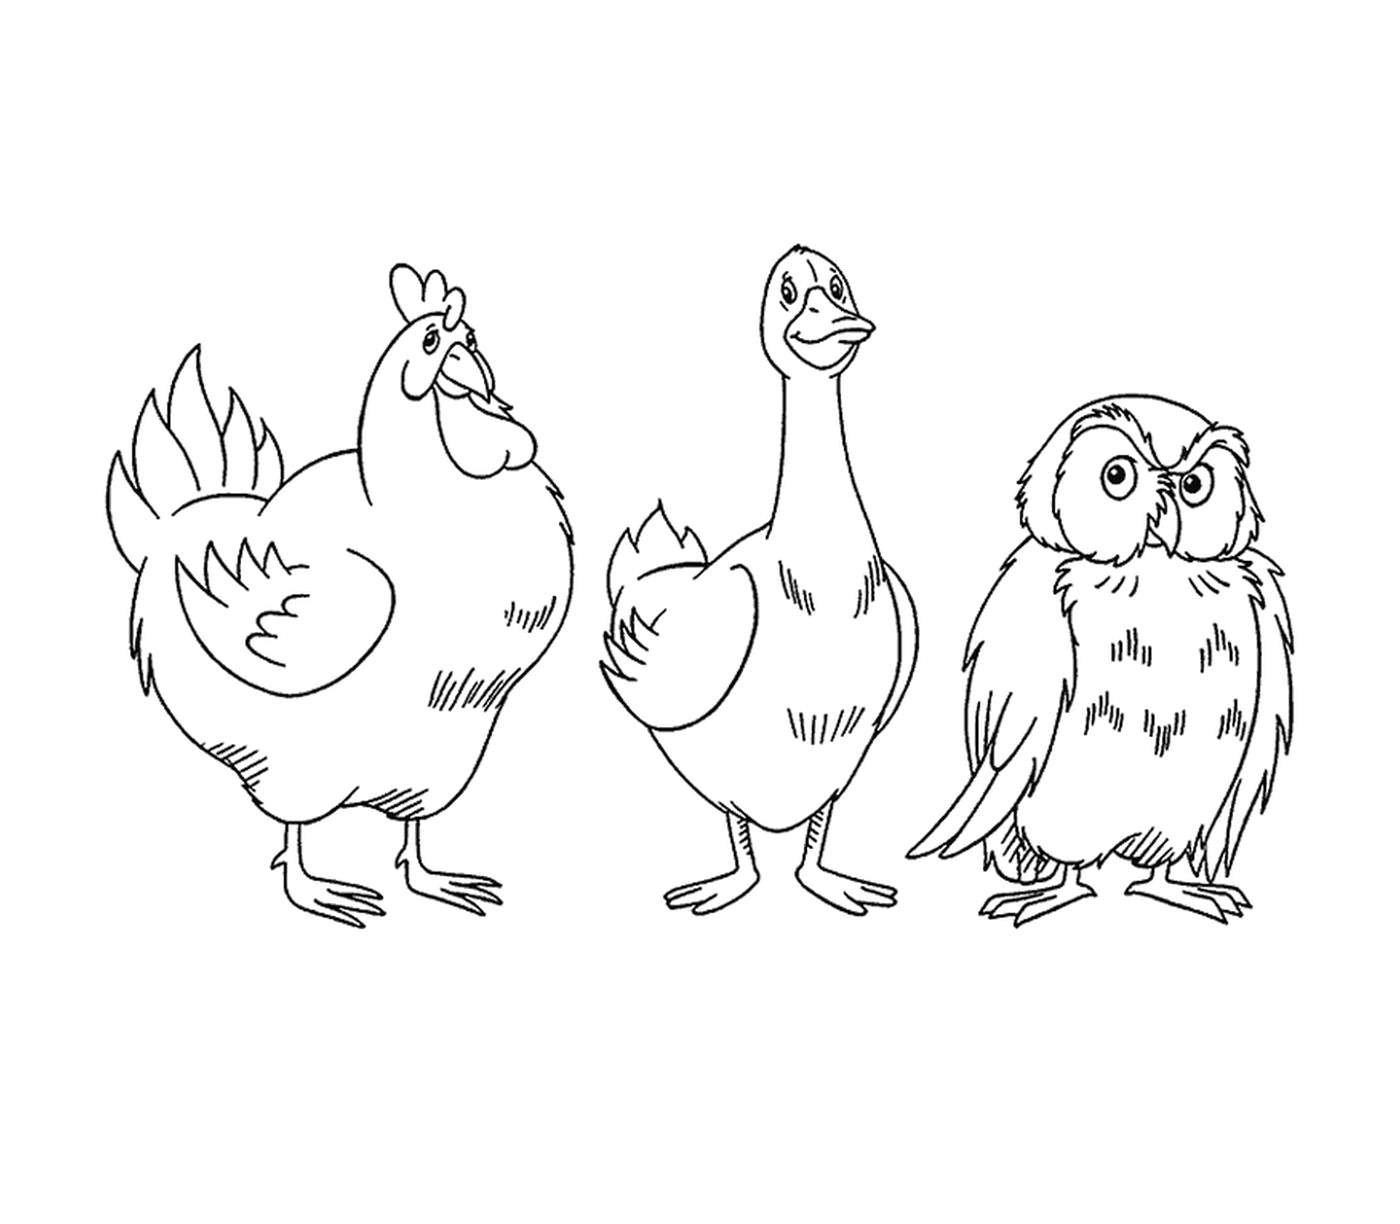  Owl, goose, and chicken 